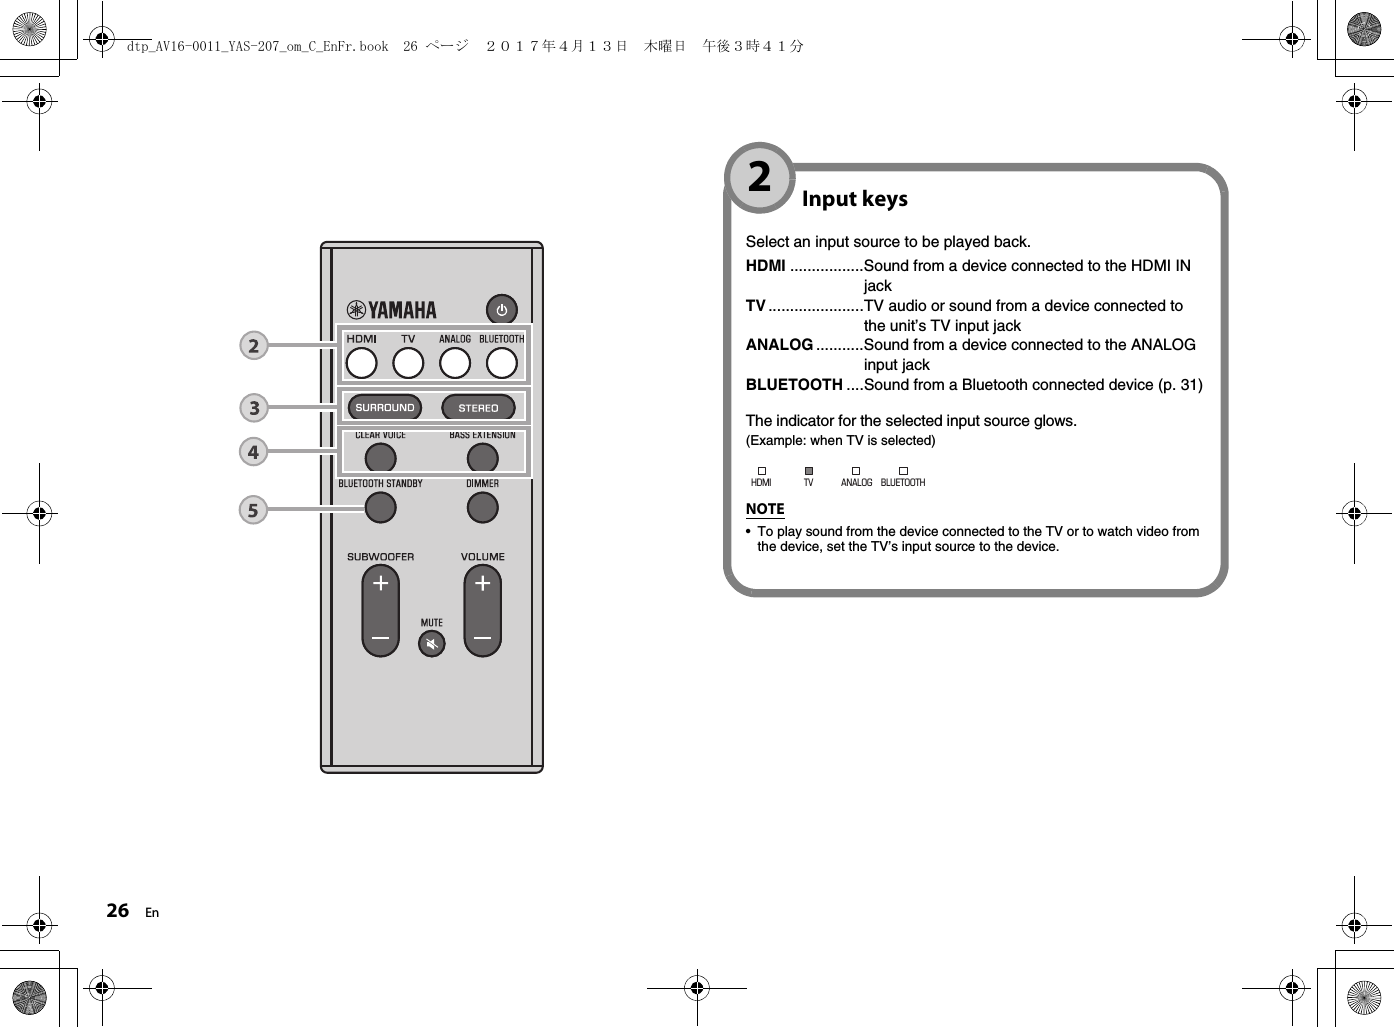 26 EnInput keysSelect an input source to be played back.HDMI .................Sound from a device connected to the HDMI IN jackTV......................TV audio or sound from a device connected to the unit’s TV input jackANALOG ...........Sound from a device connected to the ANALOG input jackBLUETOOTH ....Sound from a Bluetooth connected device (p. 31)The indicator for the selected input source glows.(Example: when TV is selected)NOTE• To play sound from the device connected to the TV or to watch video from the device, set the TV’s input source to the device.HDMI TV ANALOG BLUETOOTH2dtp_AV16-0011_YAS-207_om_C_EnFr.book  26 ページ  ２０１７年４月１３日　木曜日　午後３時４１分